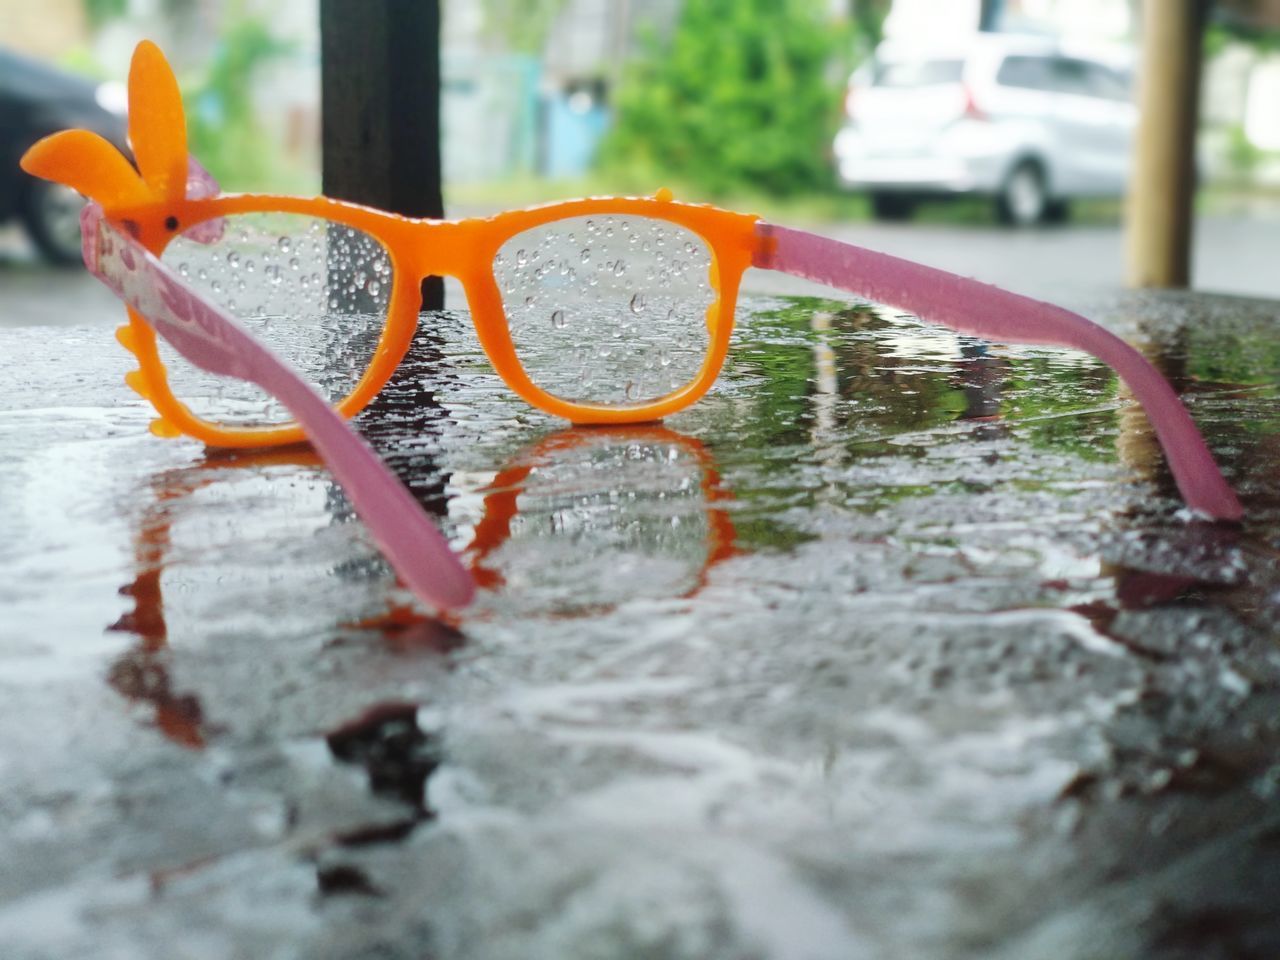 water, day, nature, no people, selective focus, wet, outdoors, flower, glasses, close-up, vehicle, plant, car, reflection, transportation, orange color, yellow, leaf